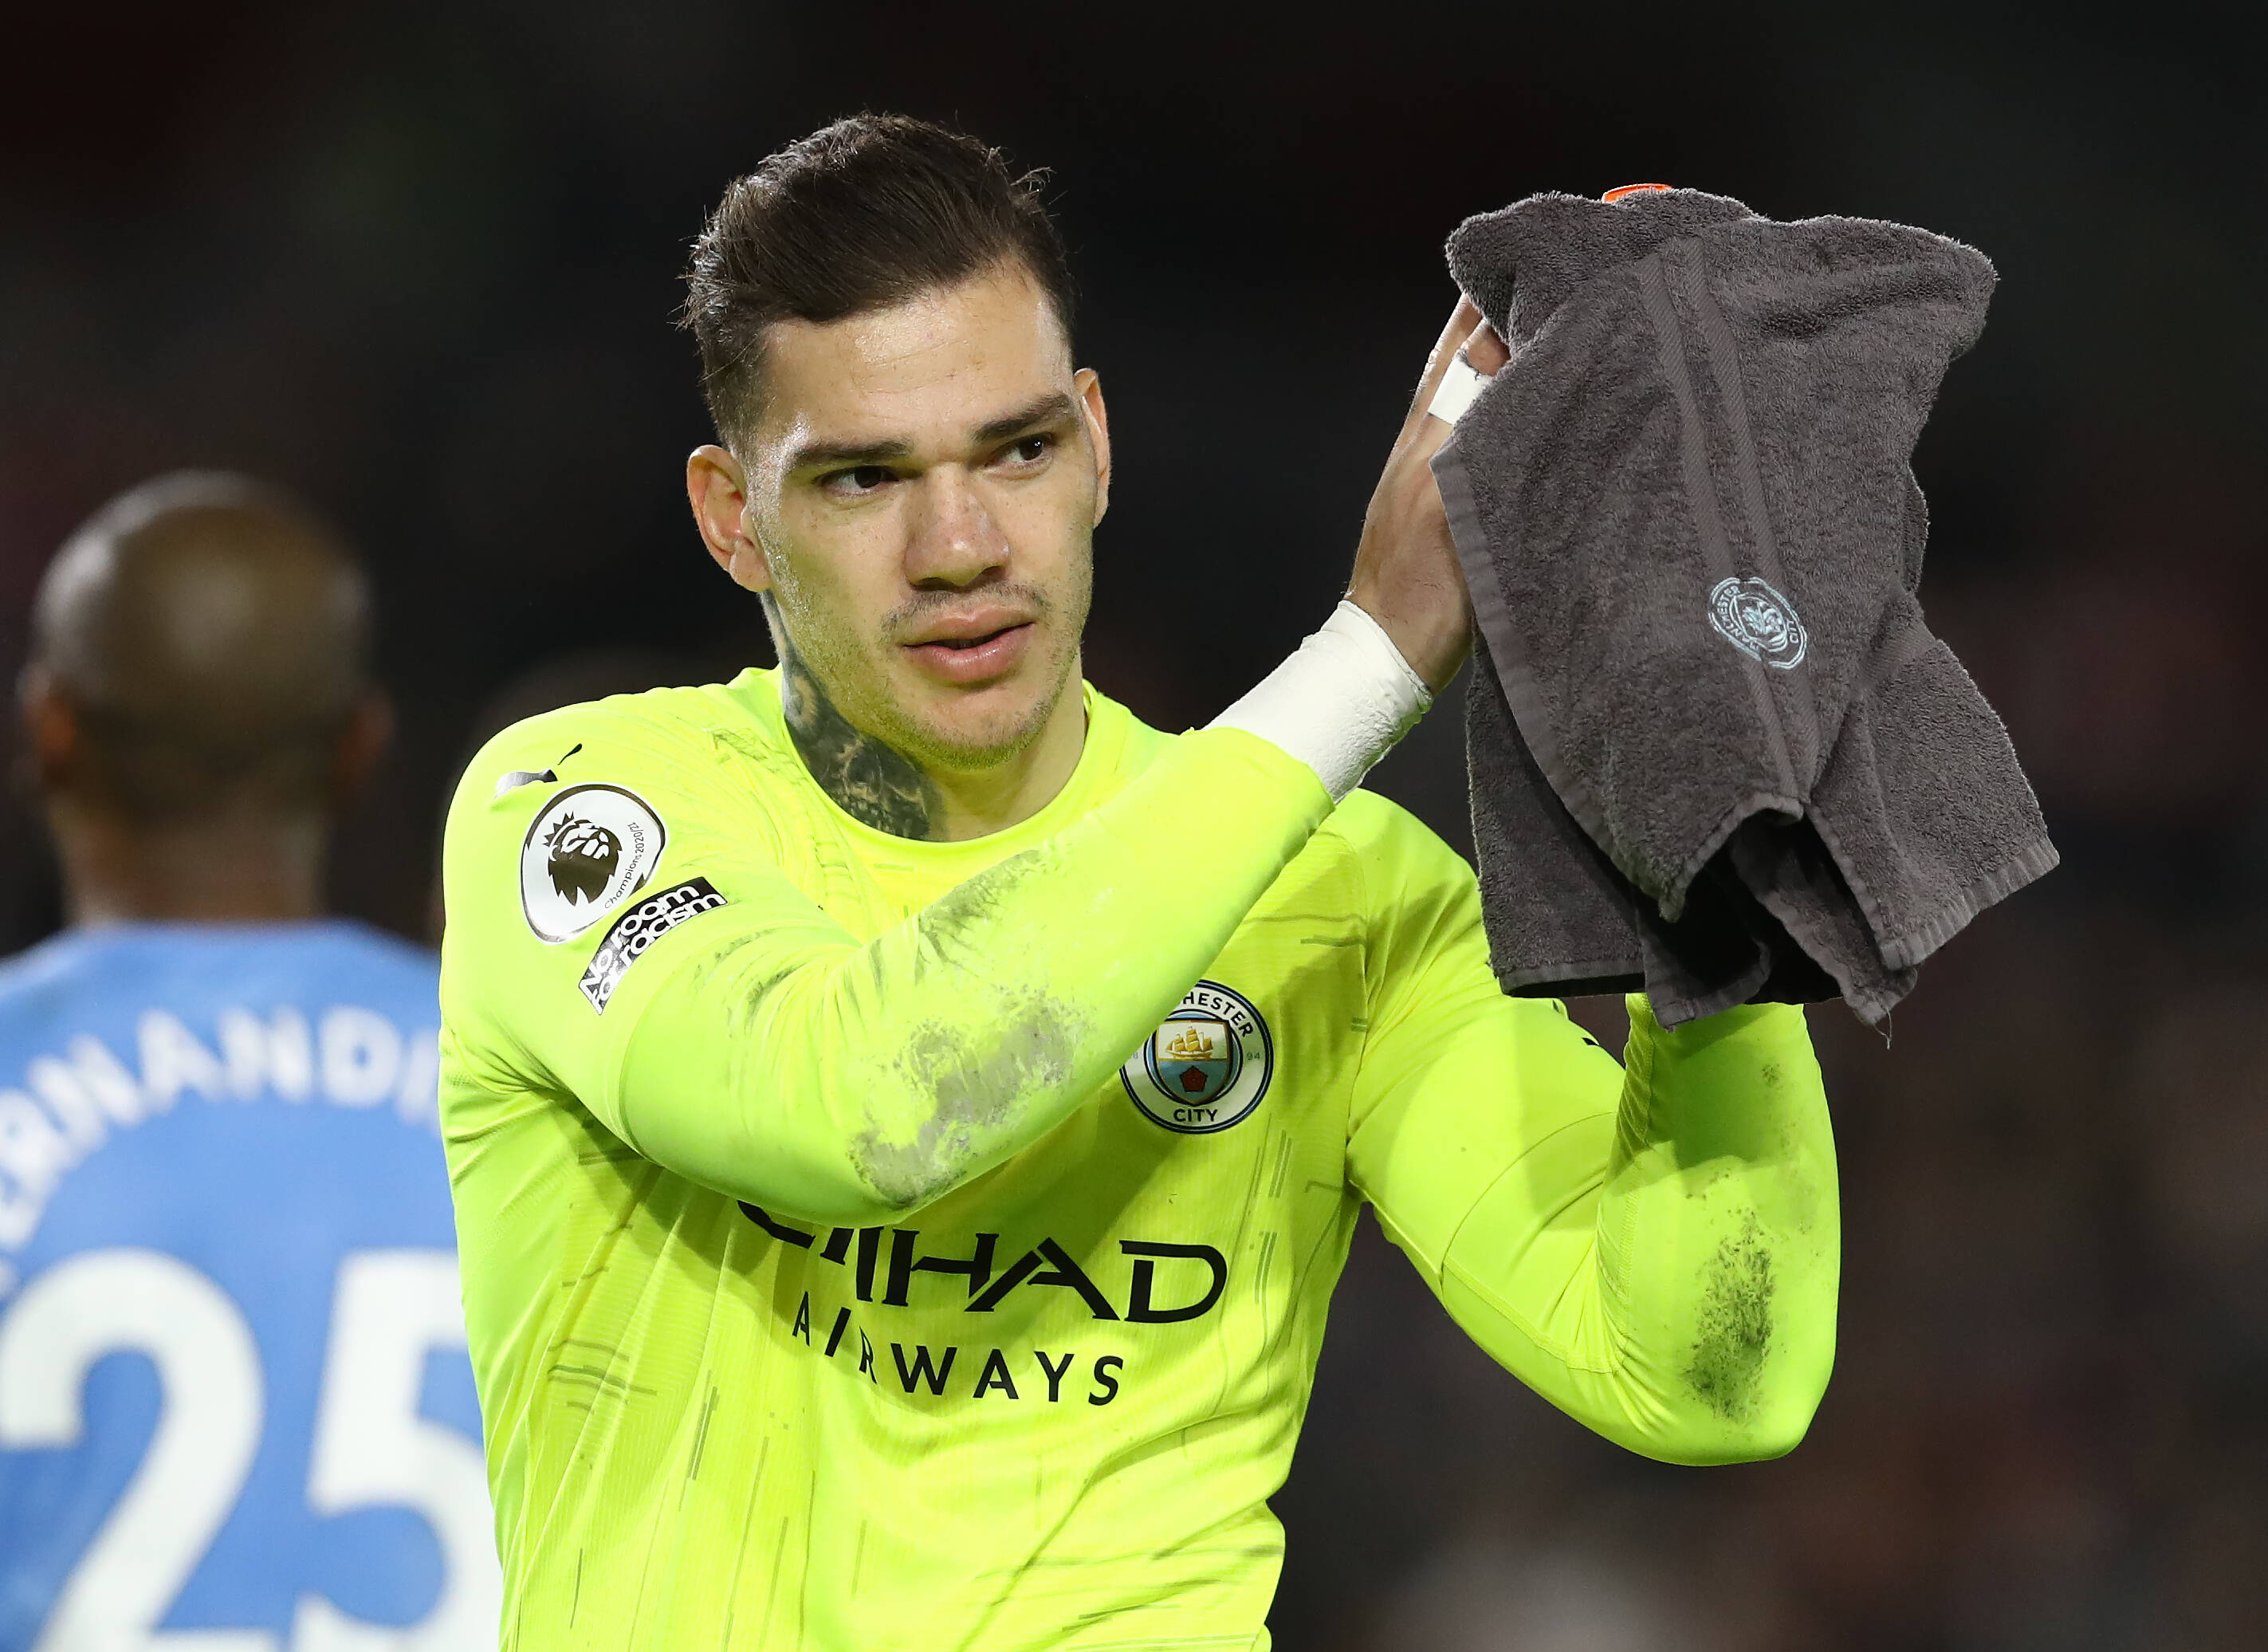 Ederson joined Manchester City from Benfica in 2017